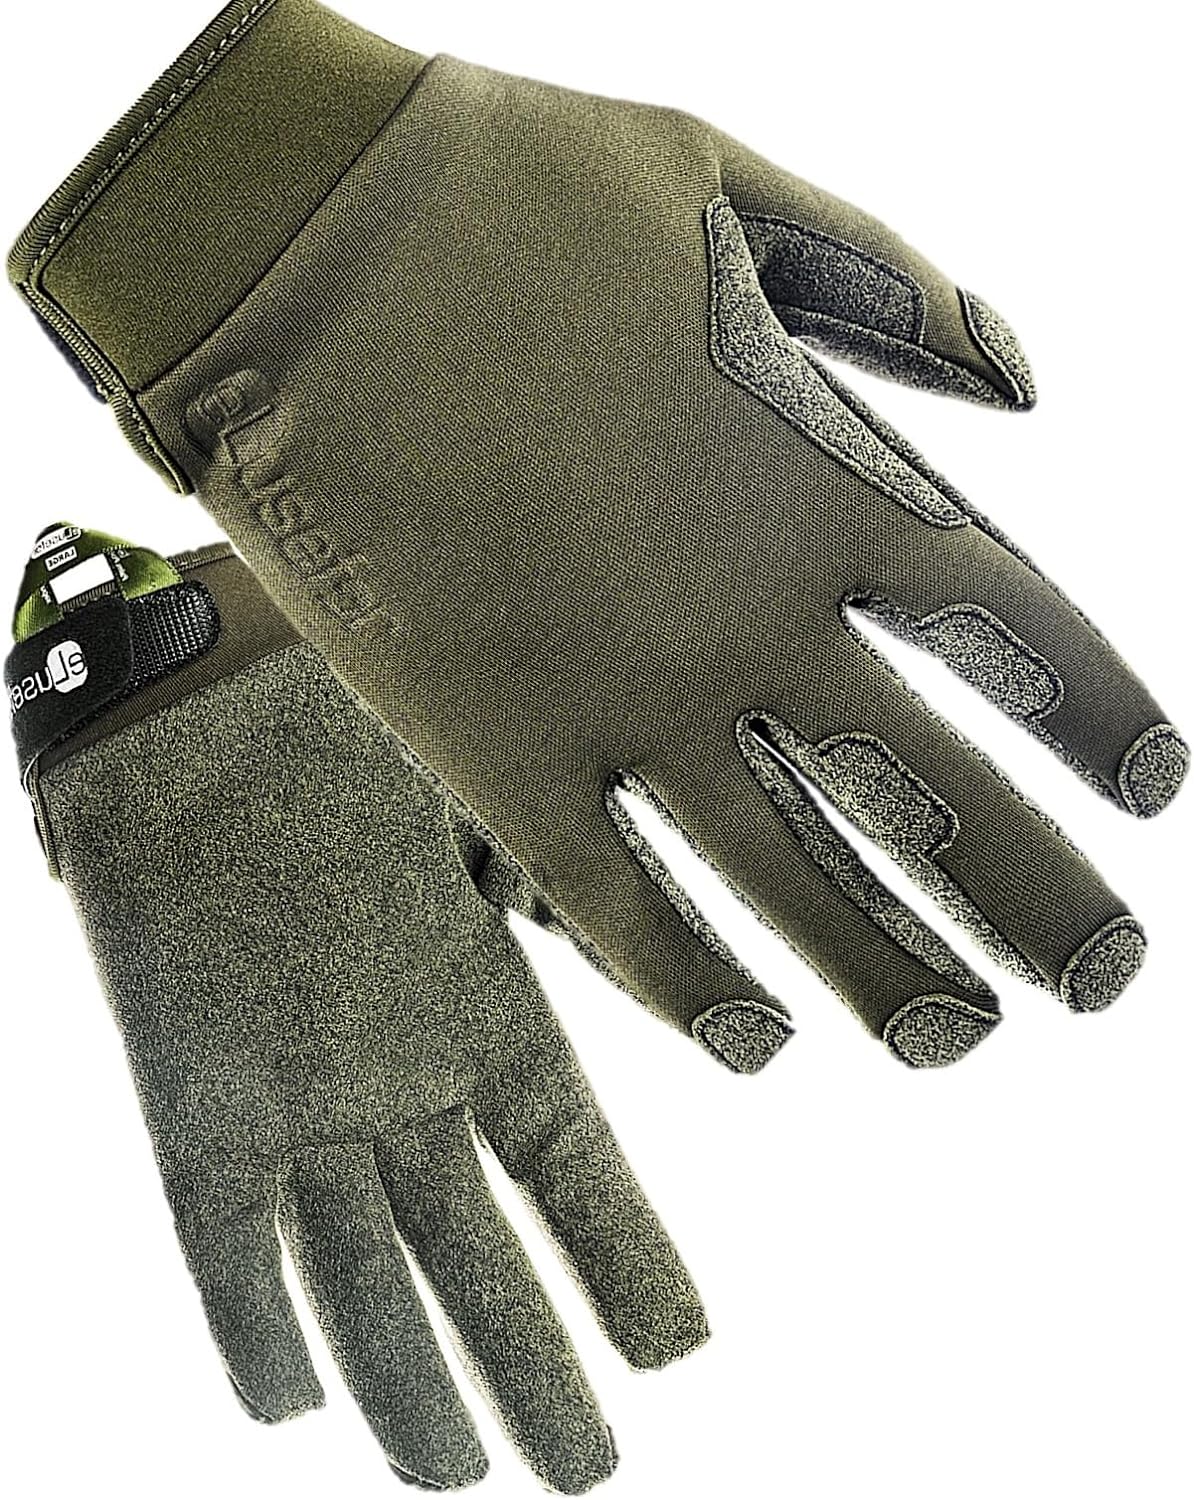 Captain Men's EDC Gloves, .8mm Durable Palm, 2Way Touch, Not for Badges, Army Green